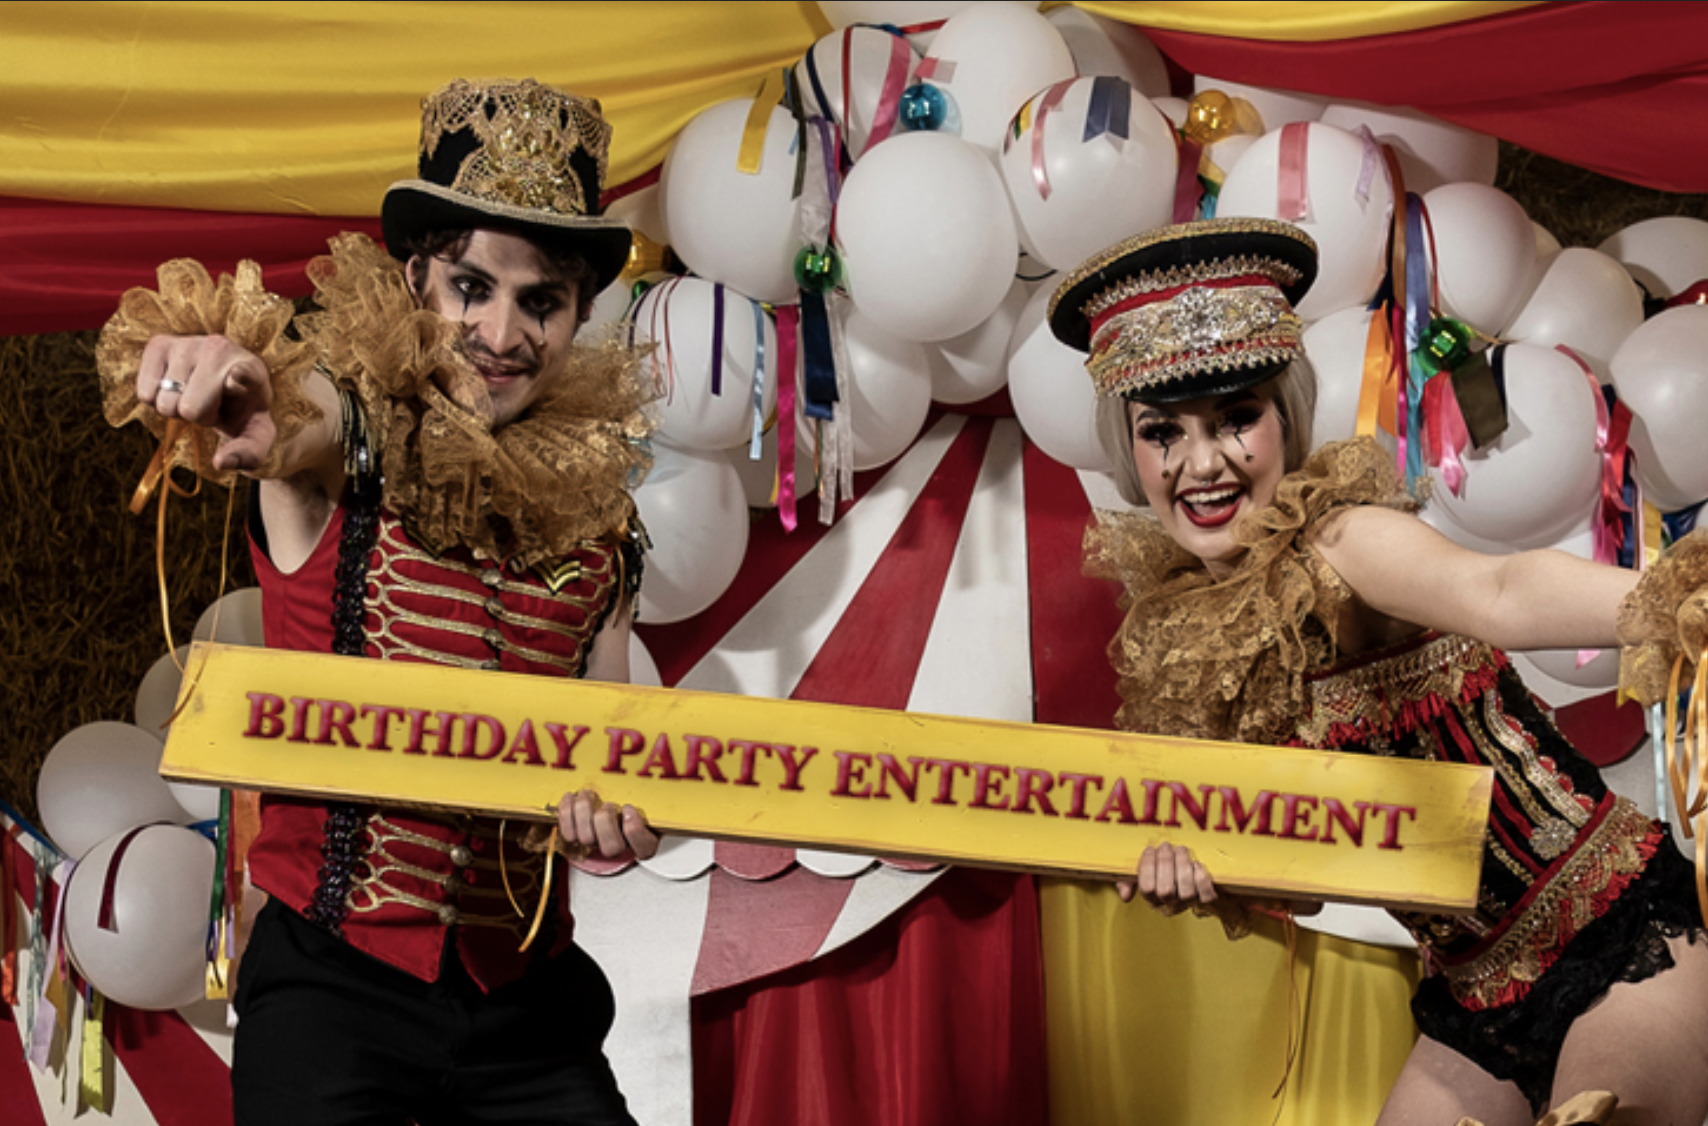 Hire birthday entertainment for events UK